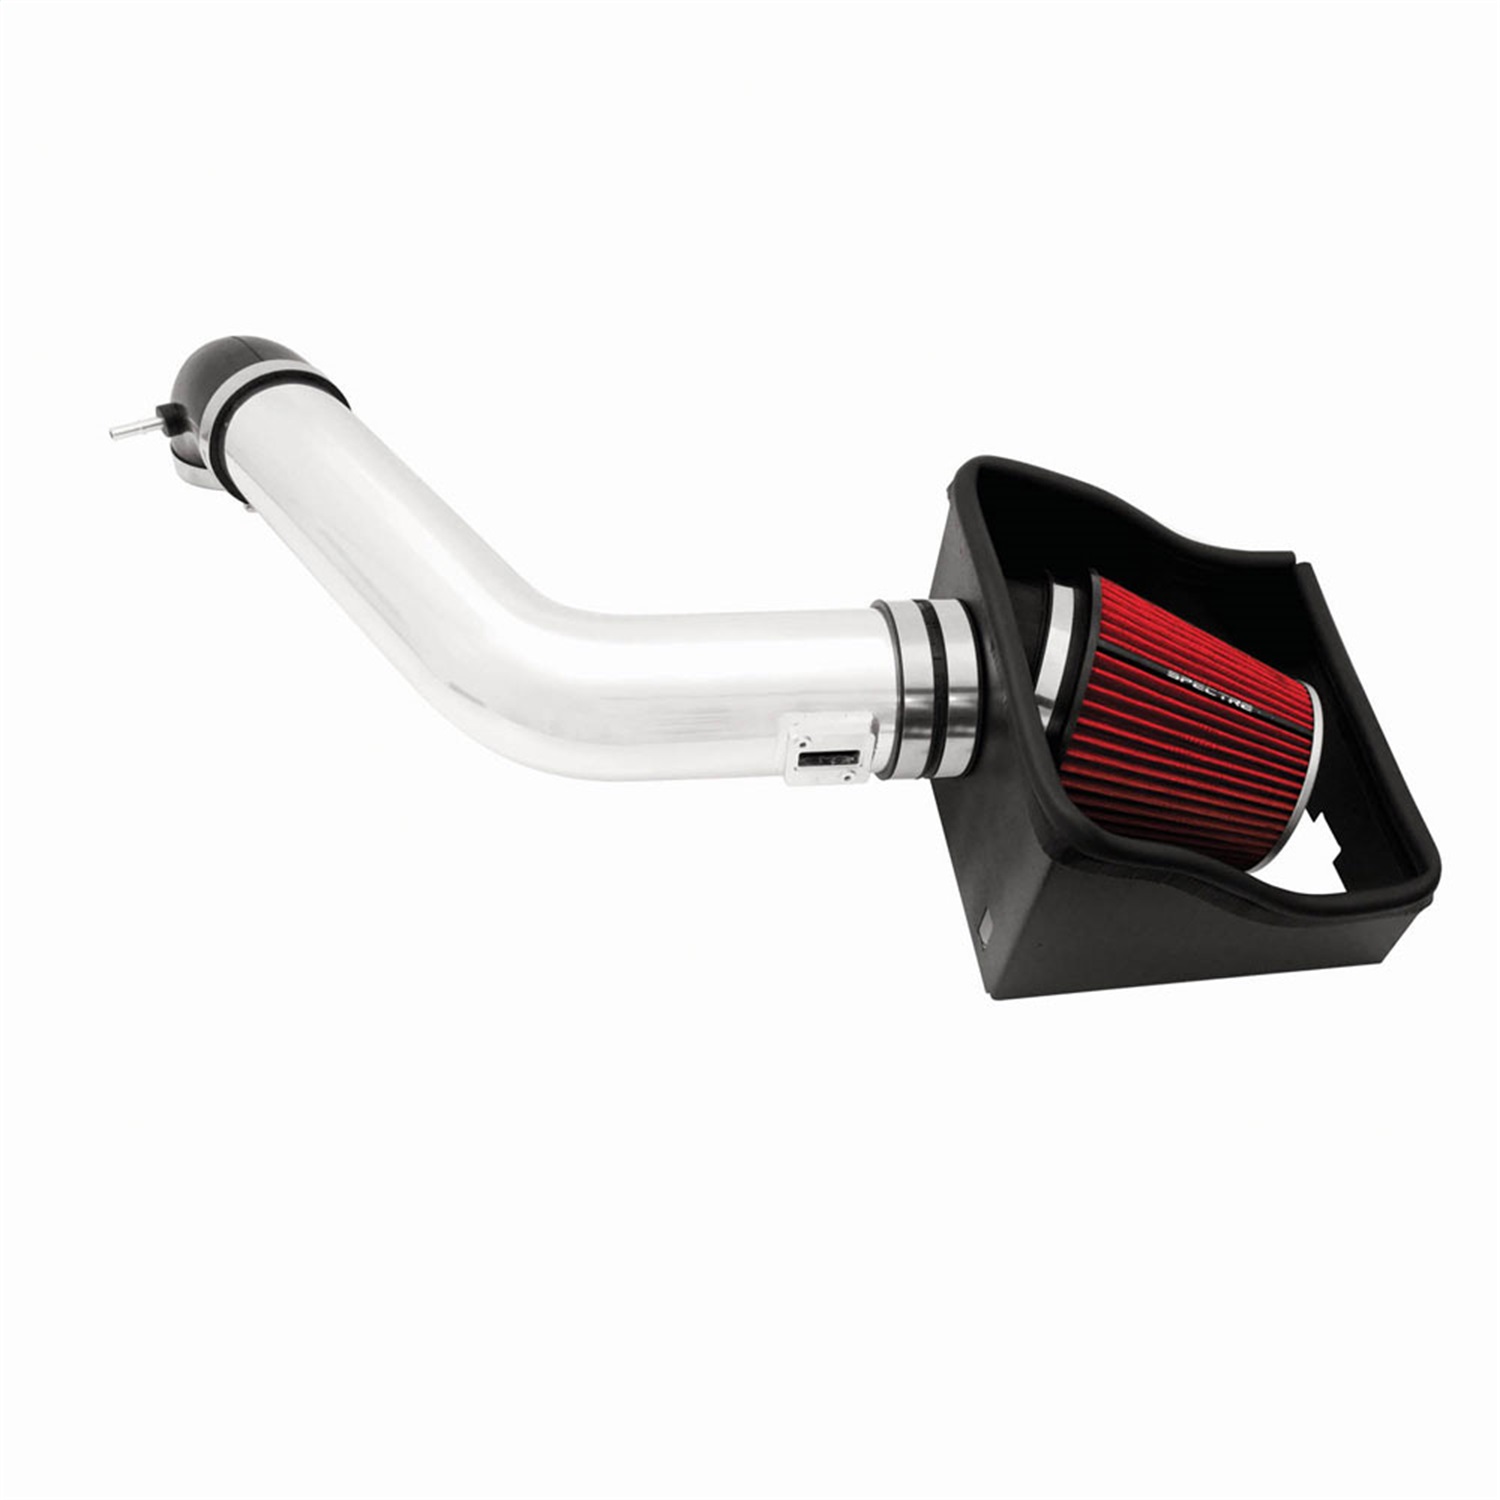 Spectre Performance Spectre Performance 9970 Air Intake Kit 07-14 Expedition F-150 Navigator